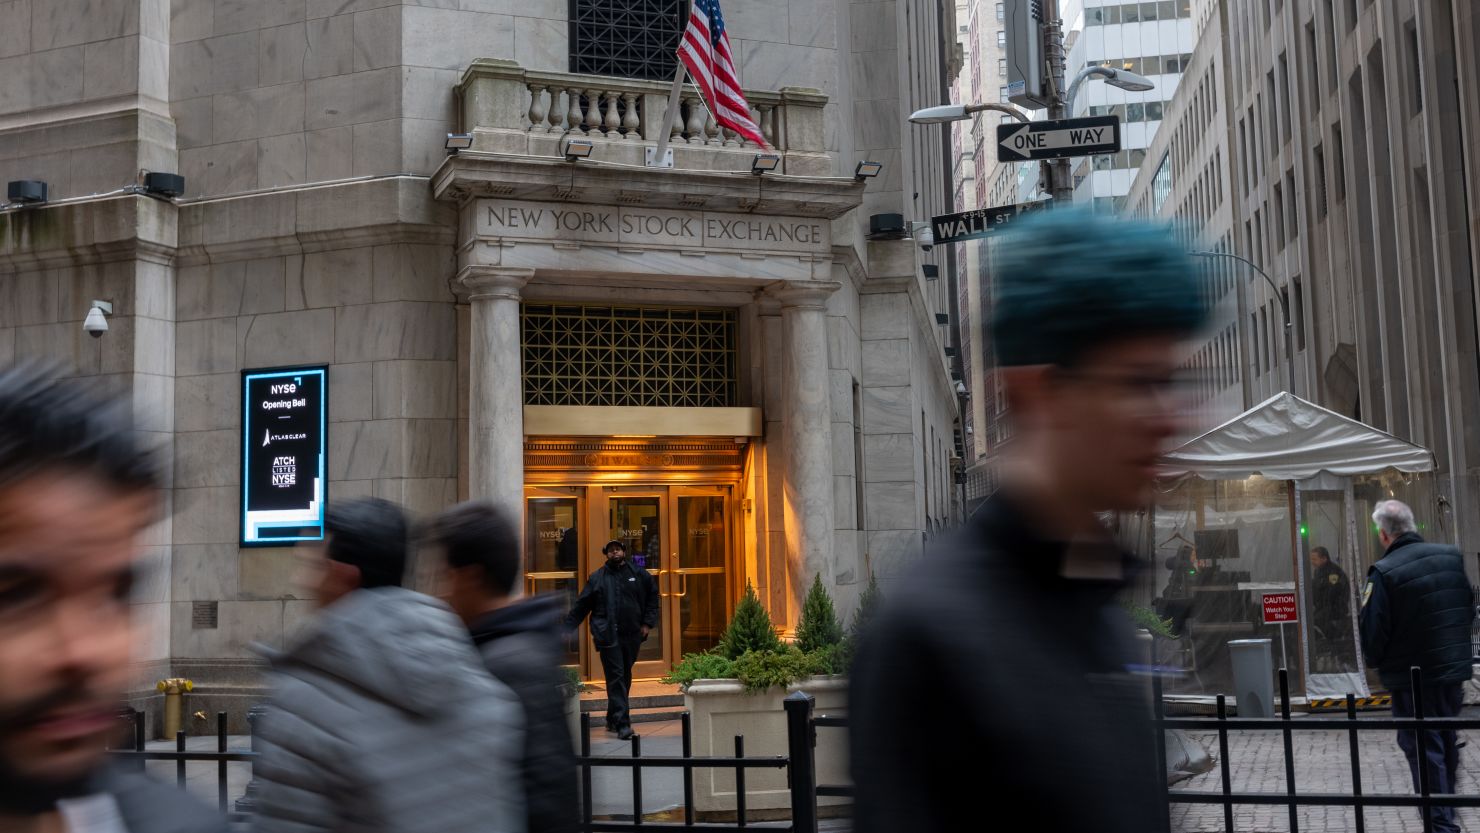 Hot inflation data has pushed highly anticipated interest rate cuts by the Federal Reserve further out in the calendar, and geopolitical chaos also has investors on edge.